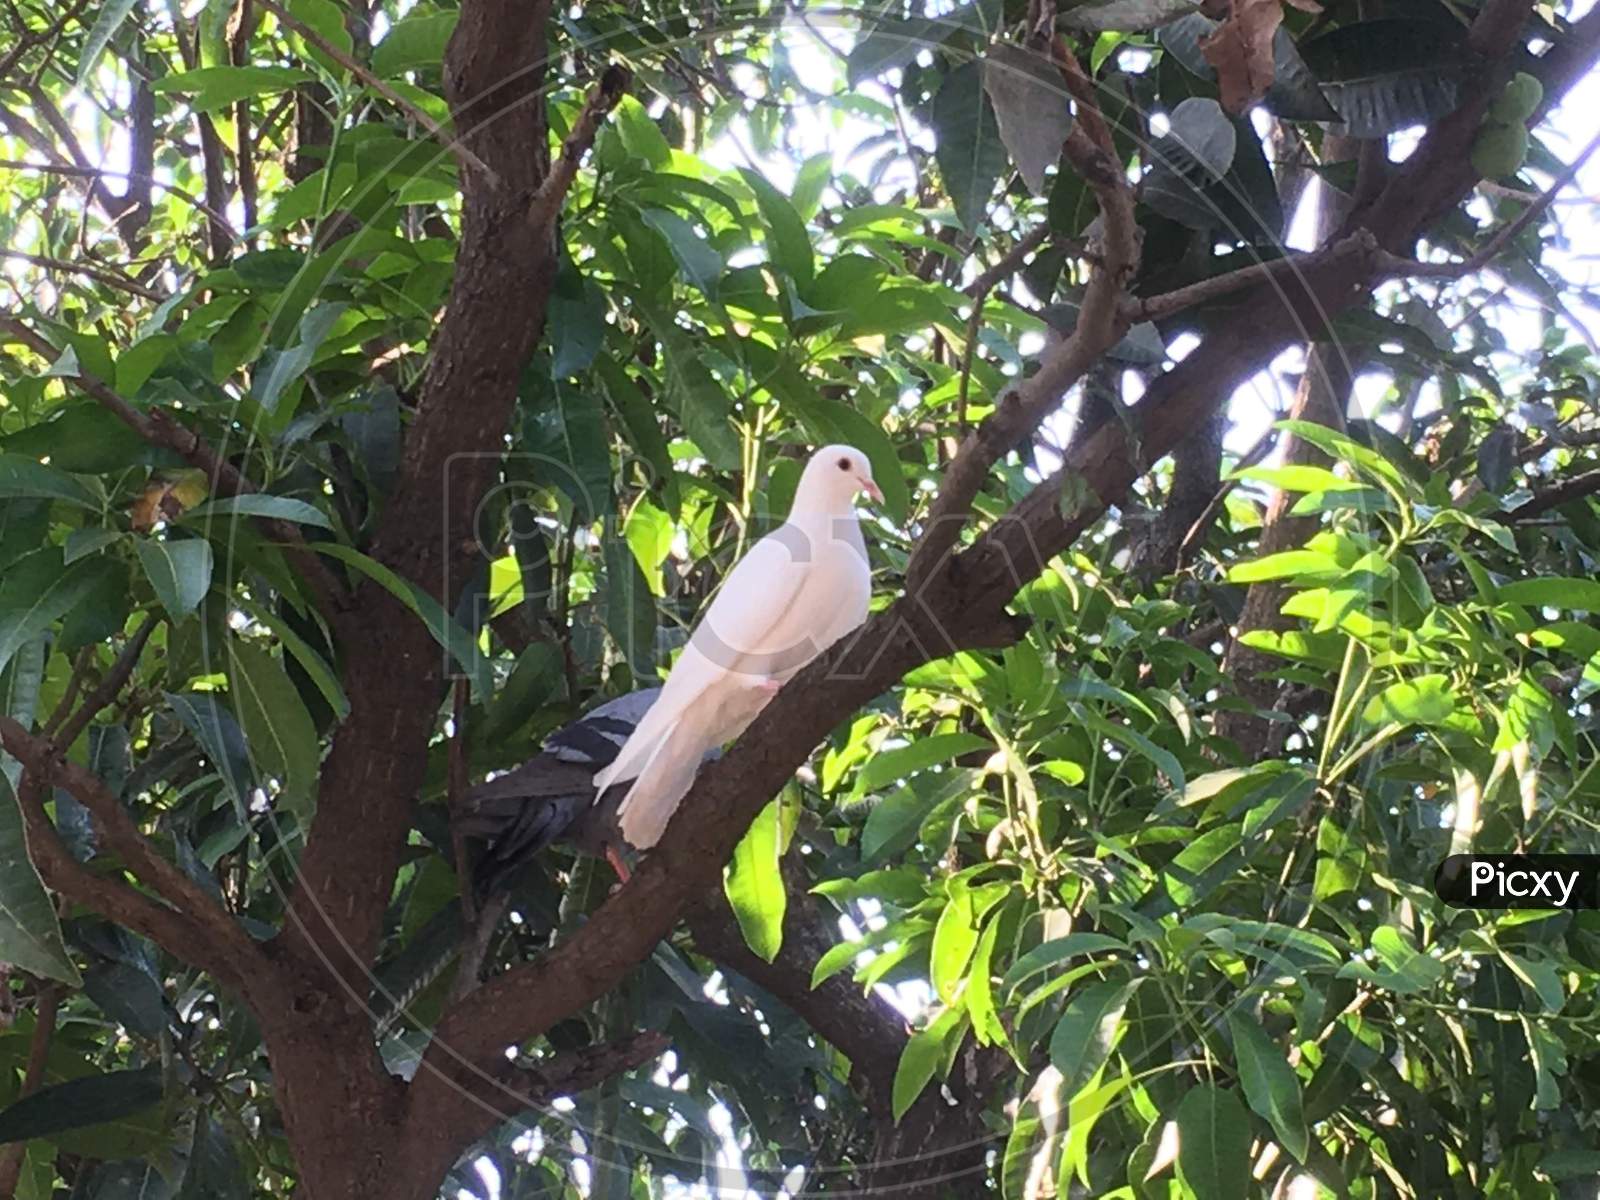 White Pigeon on the Tree